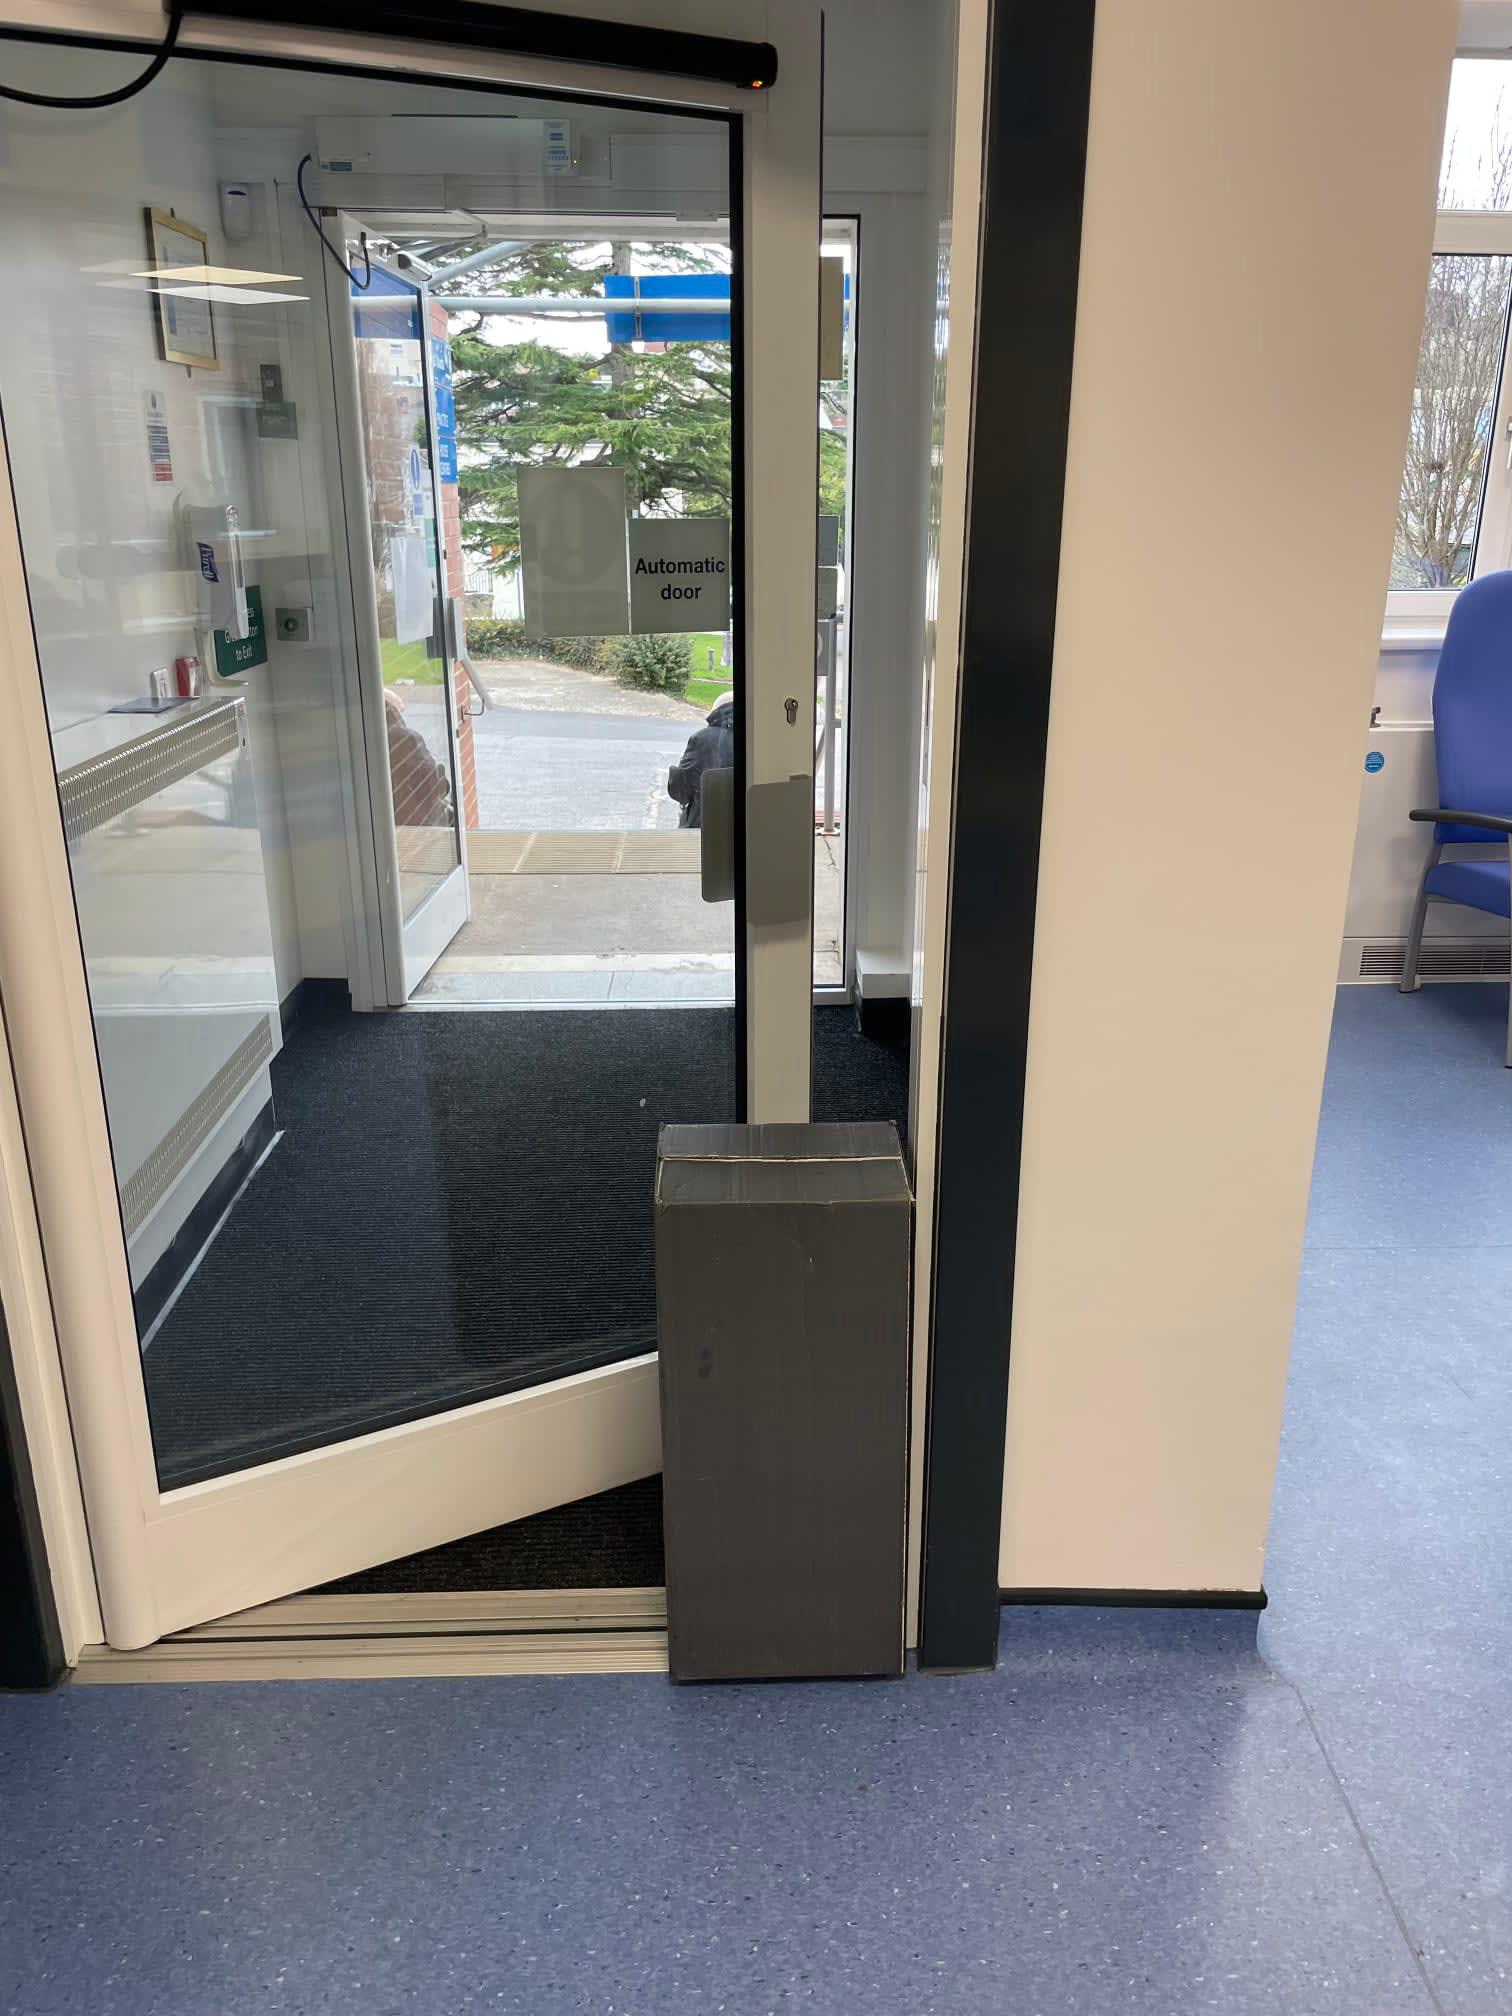 Images Real Automatic Doors